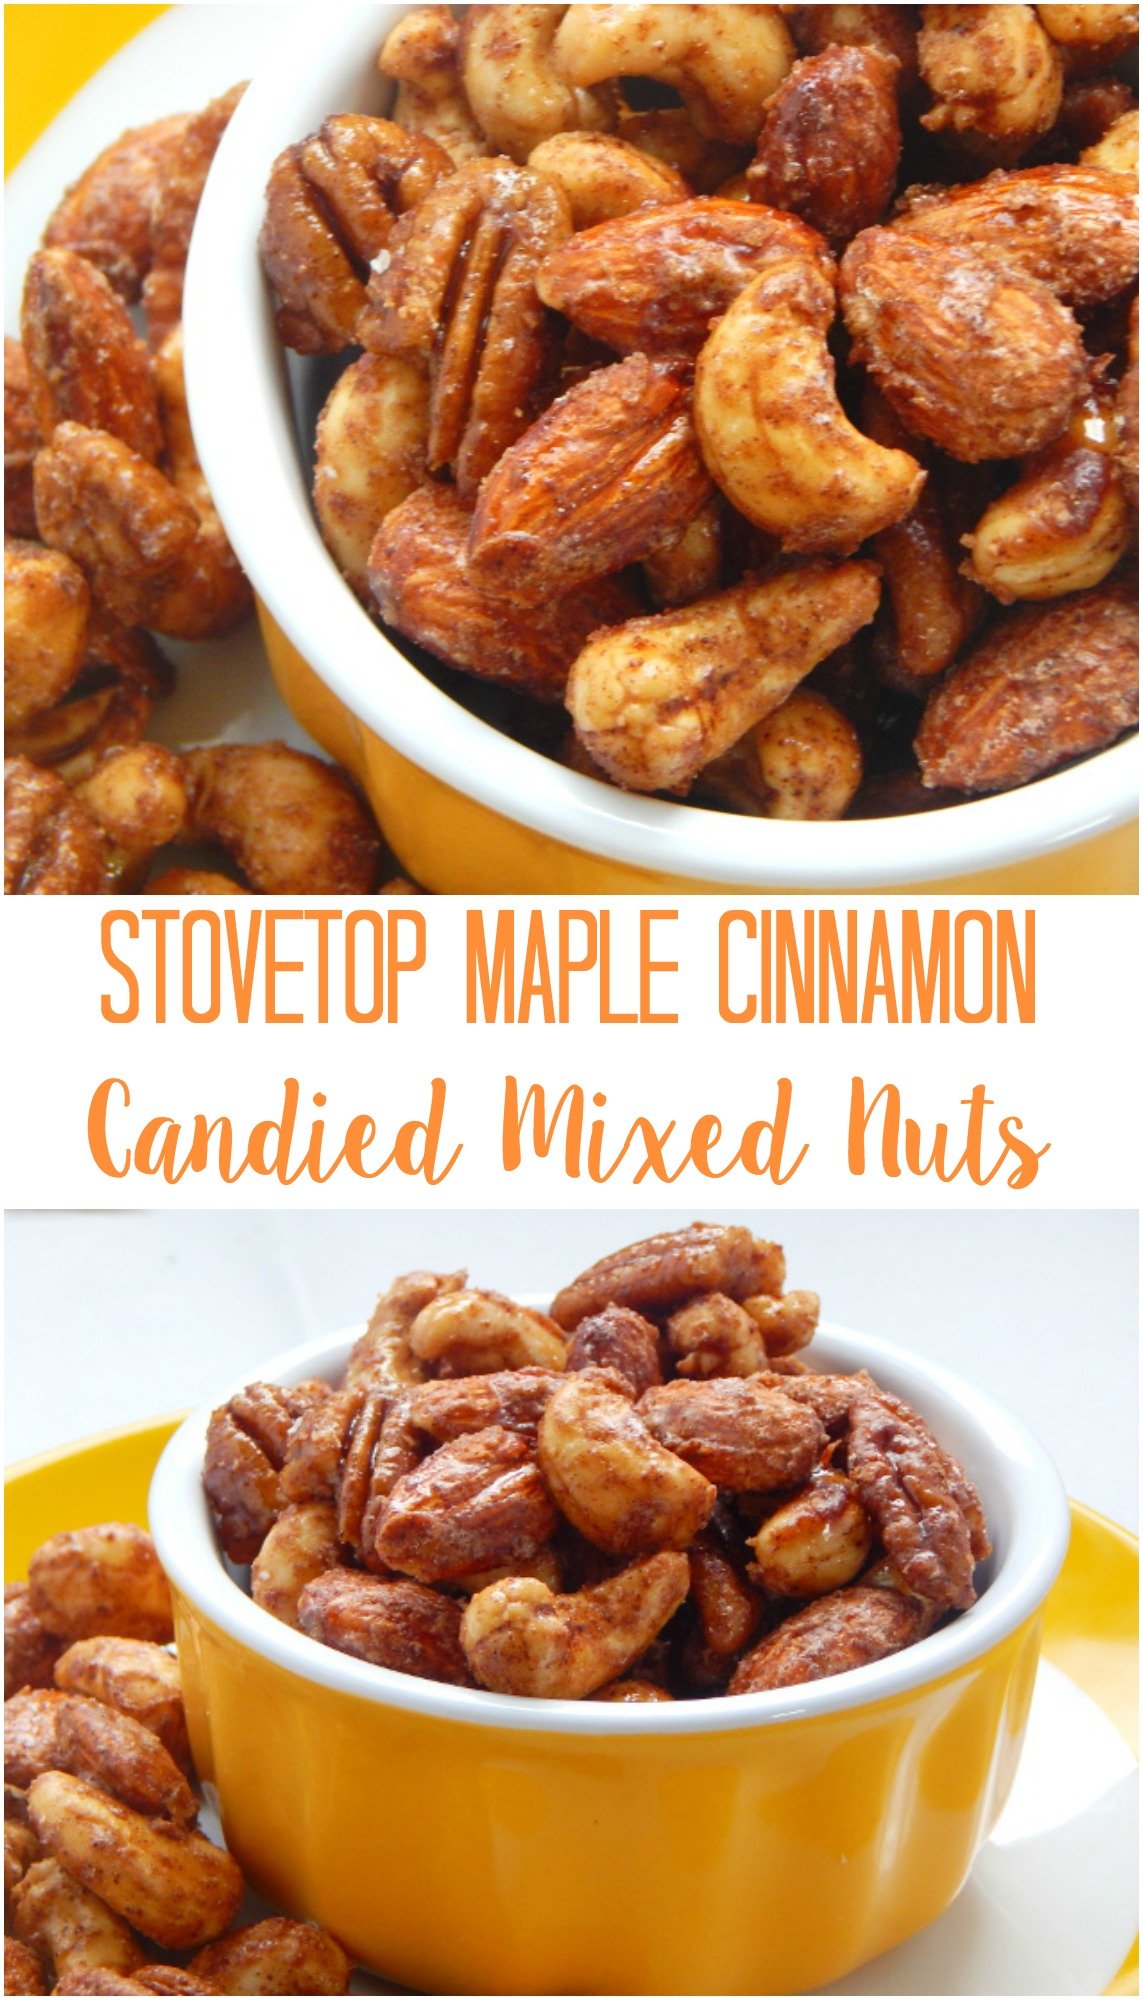 Stove-top Maple Cinnamon Candied Mixed Nuts | Lemons + Zest